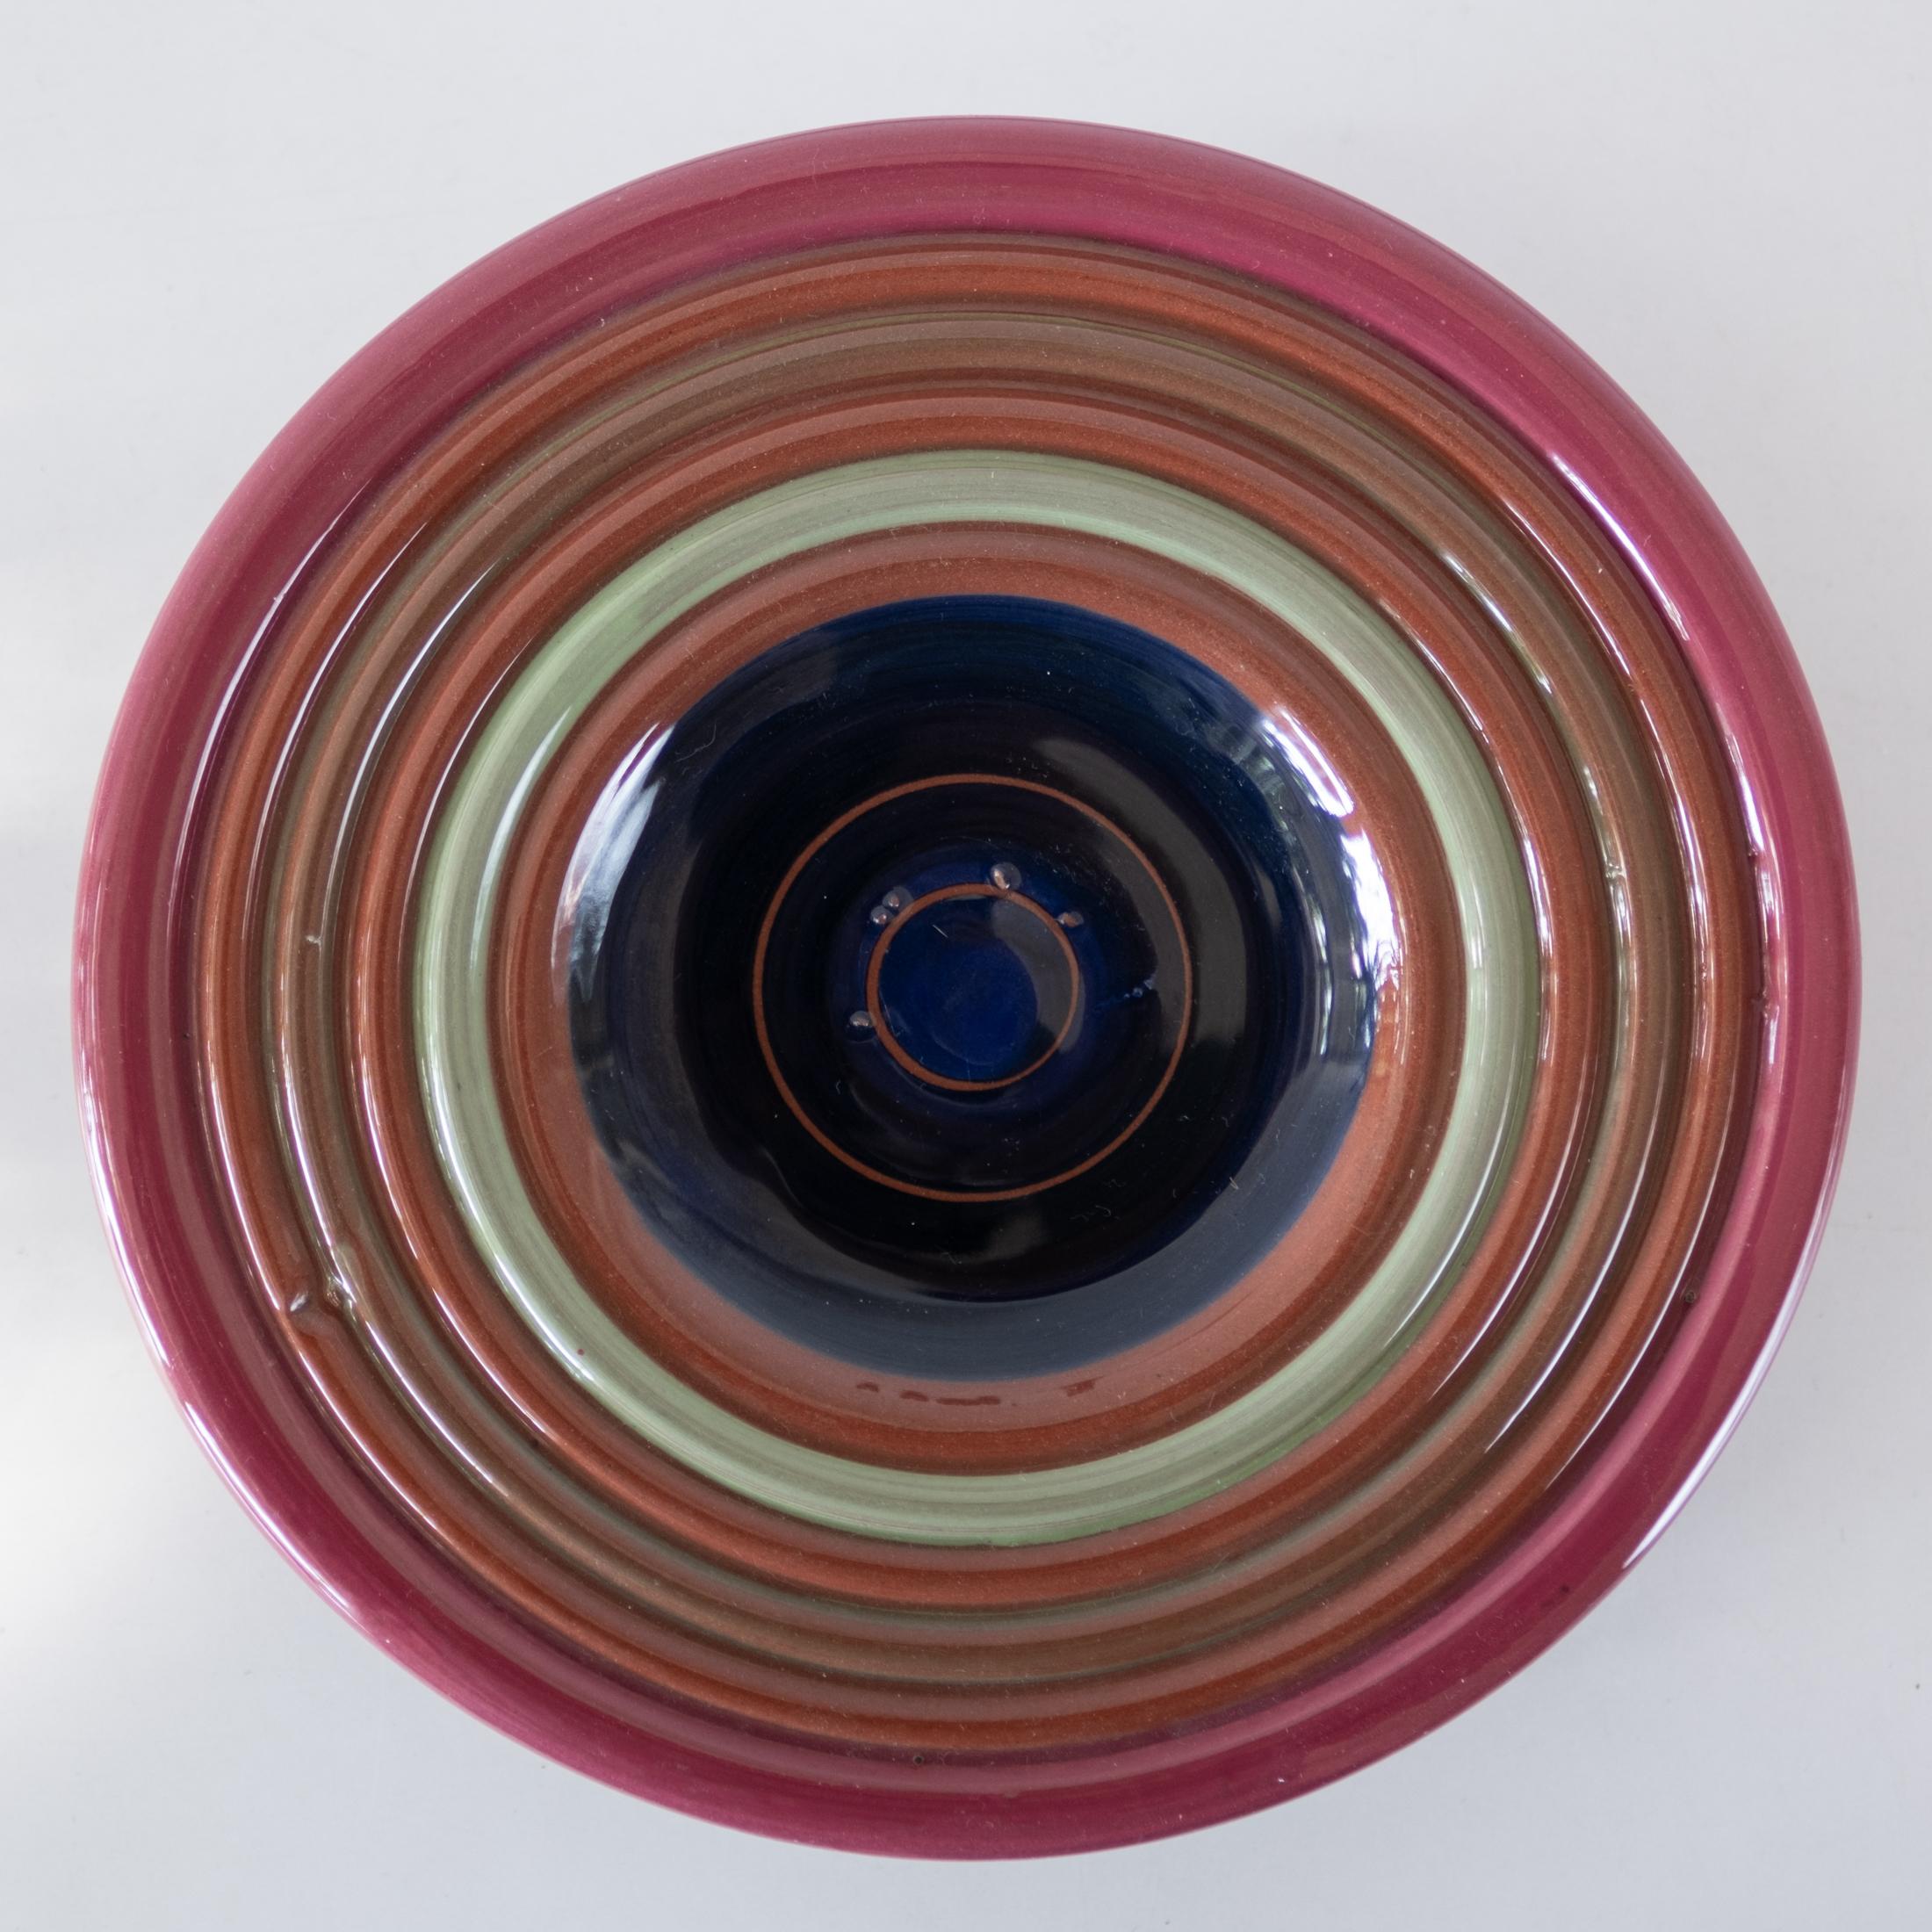 Peter Shire Ceramic EXP Pottery 1997 Compote Bowl 3